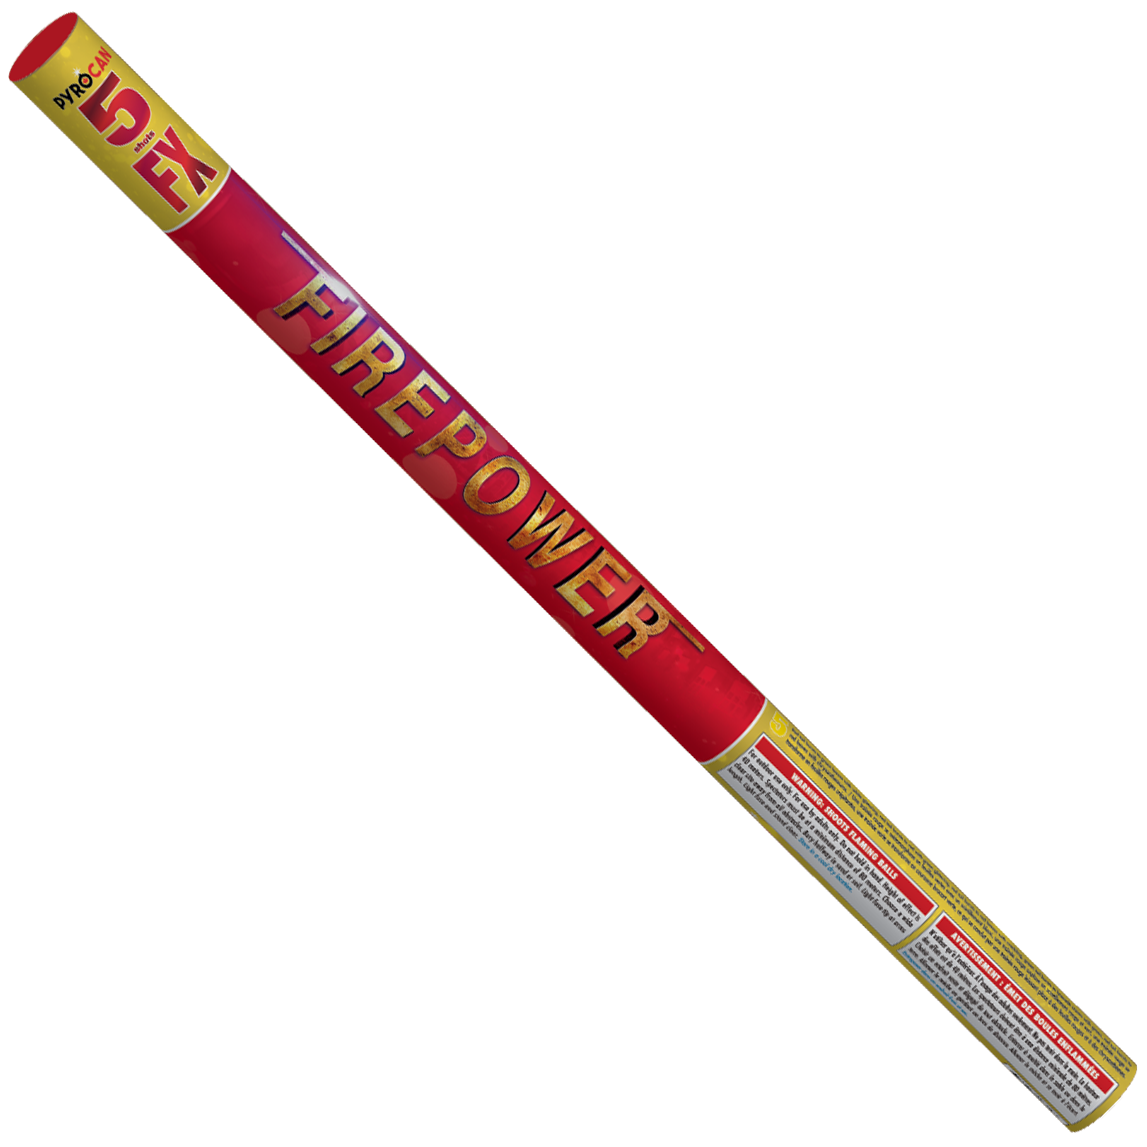 Buy Firepower Roman Candles at Rocket Fireworks Canada